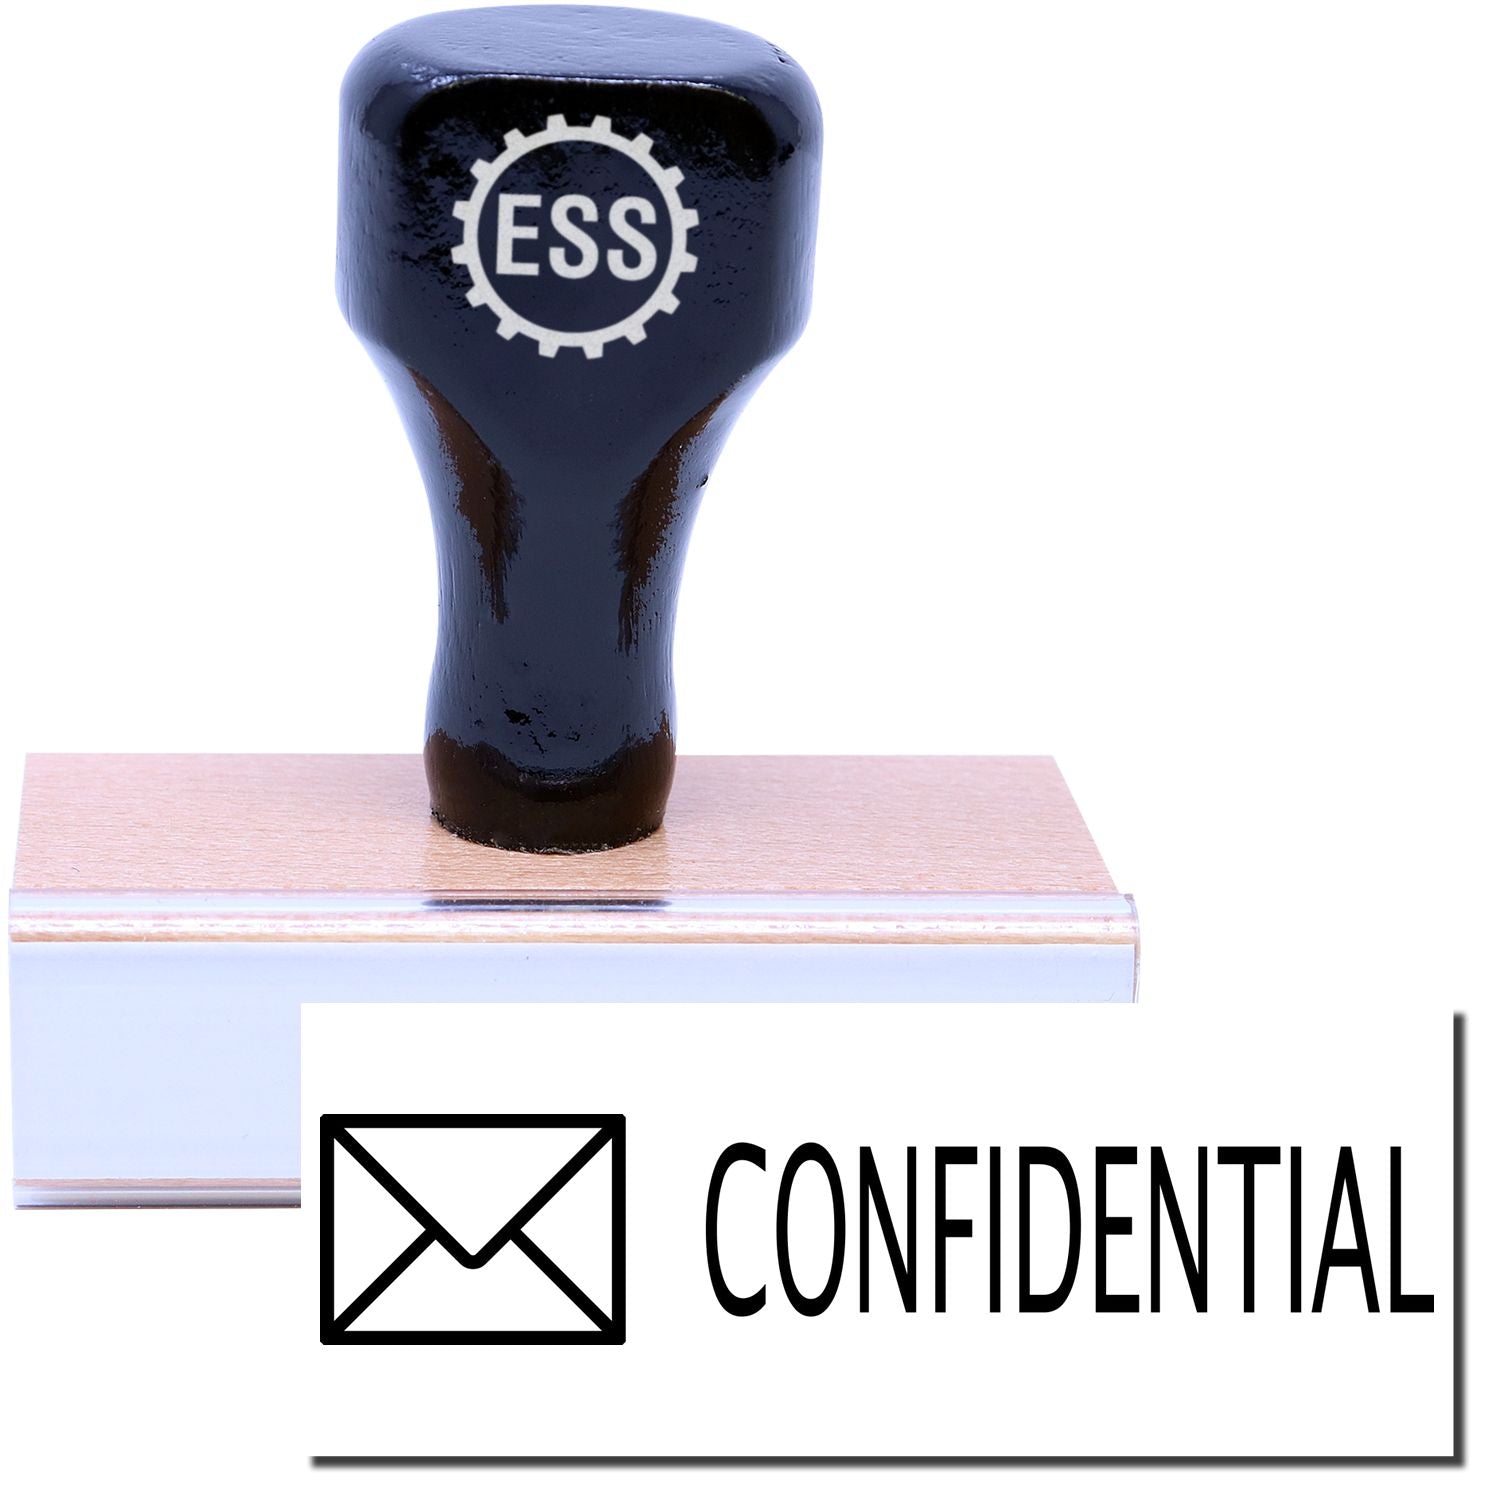 A stock office rubber stamp with a stamped image showing how the text "CONFIDENTIAL" with a small image of an envelope on the left side is displayed after stamping.